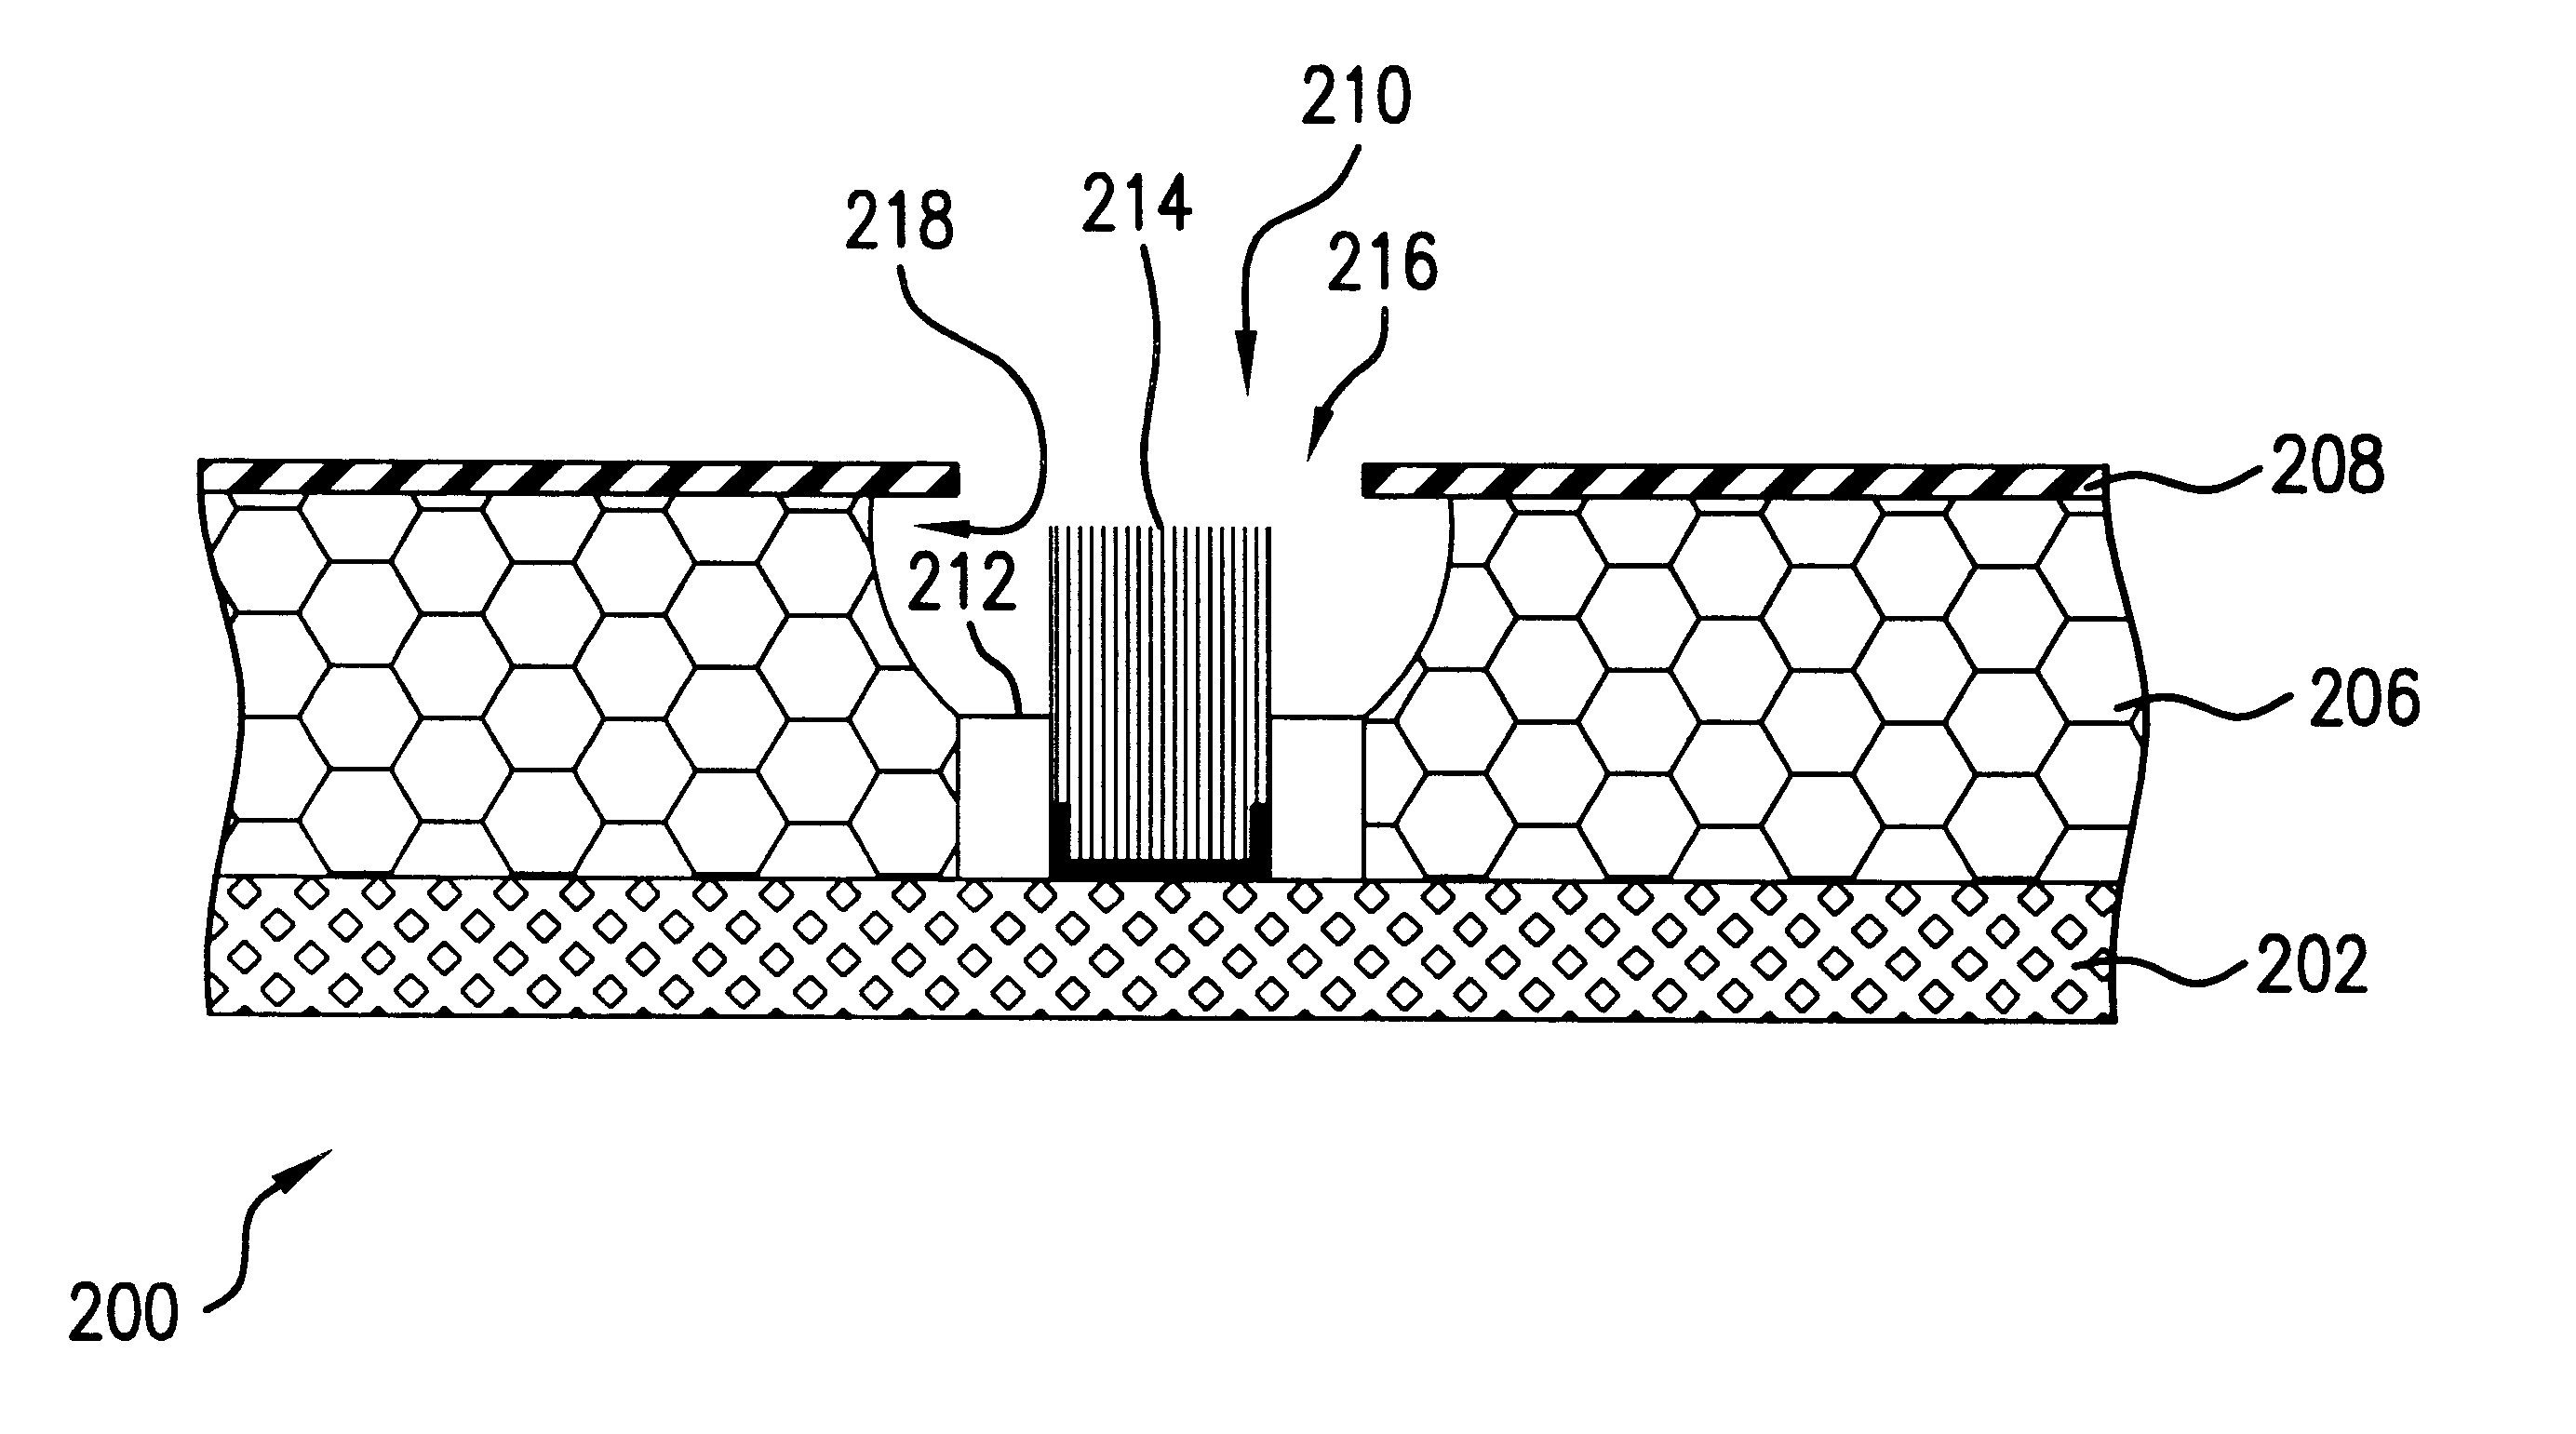 Methods for manufacture of self-aligned integrally gated nanofilament field emitter cell and array